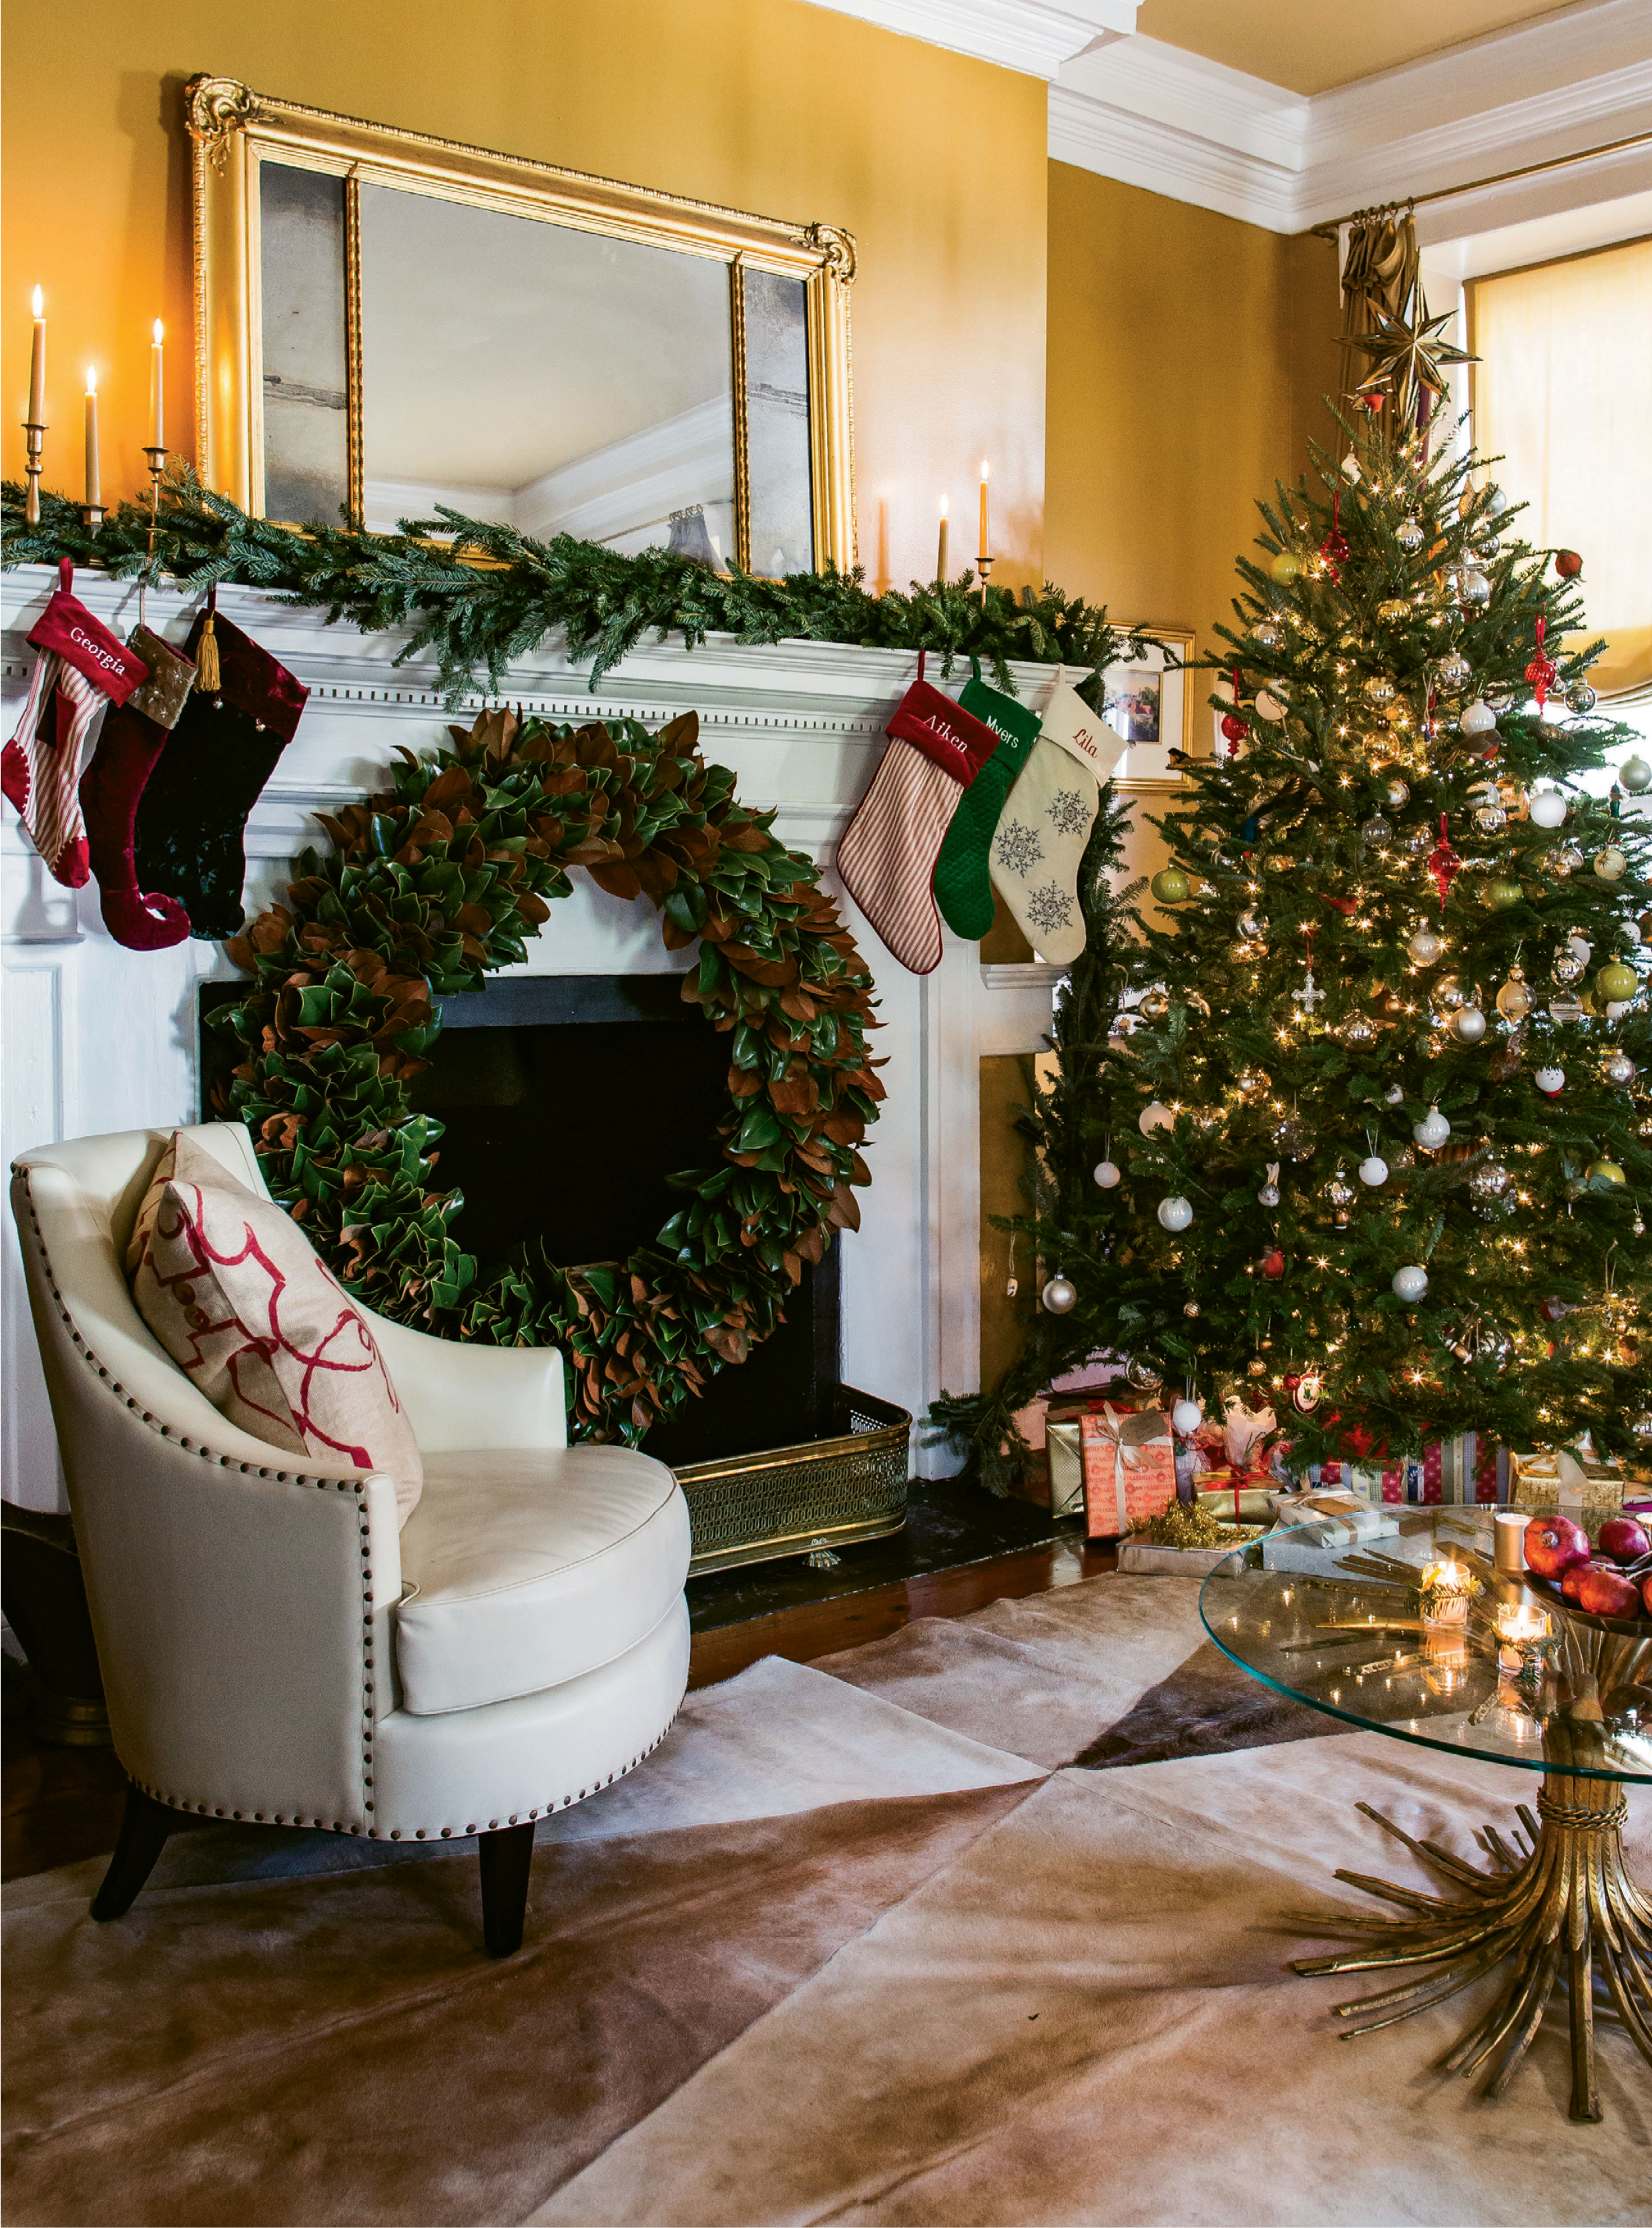 LIGHT IT UP: A Christmas tree with lights and presents more than suffices for décor this time of year, says Tara. She added simple metallic balls and her children’s homemade ornaments to the mix. TIP: Tara’s go-to for “thick, gorgeous foil wrapping paper” is T.J. Maxx.